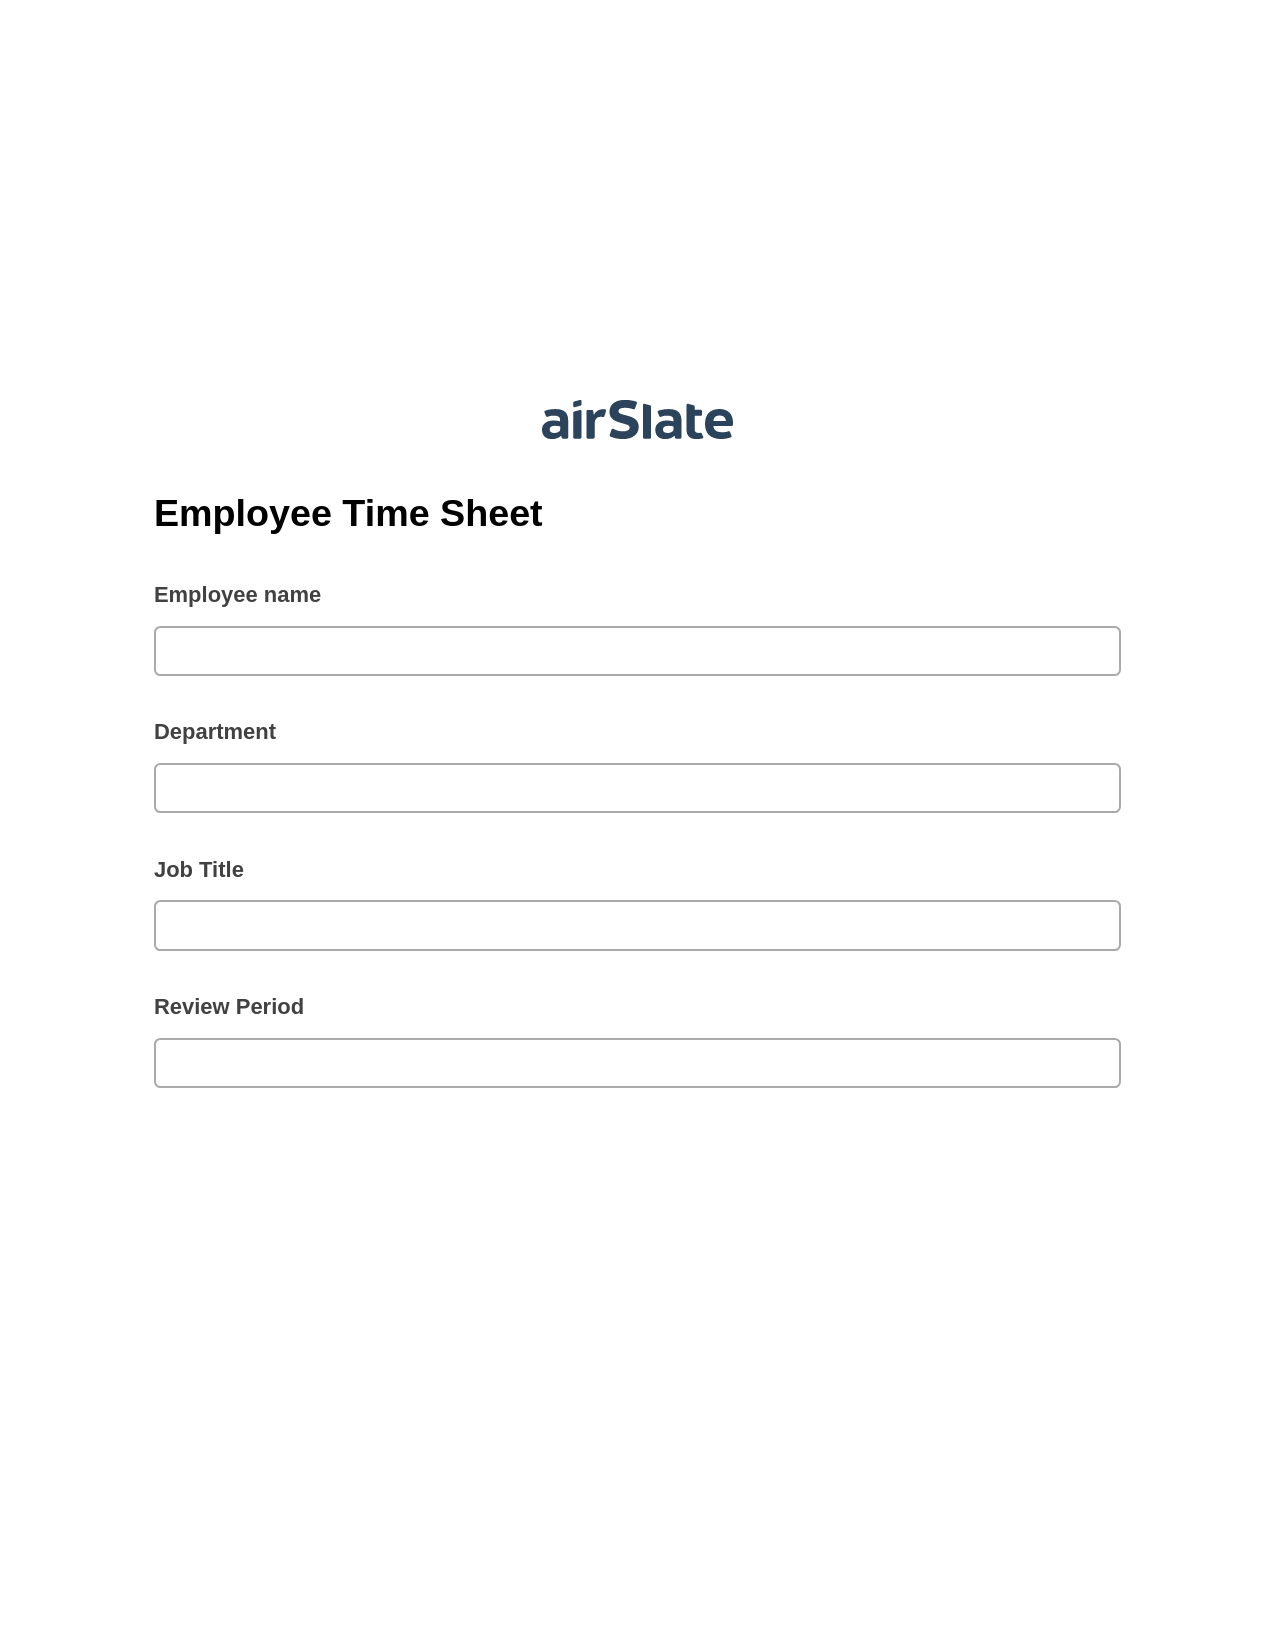 Multirole Employee Time Sheet Pre-fill from Office 365 Excel Bot, Create slate addon, Archive to Dropbox Bot